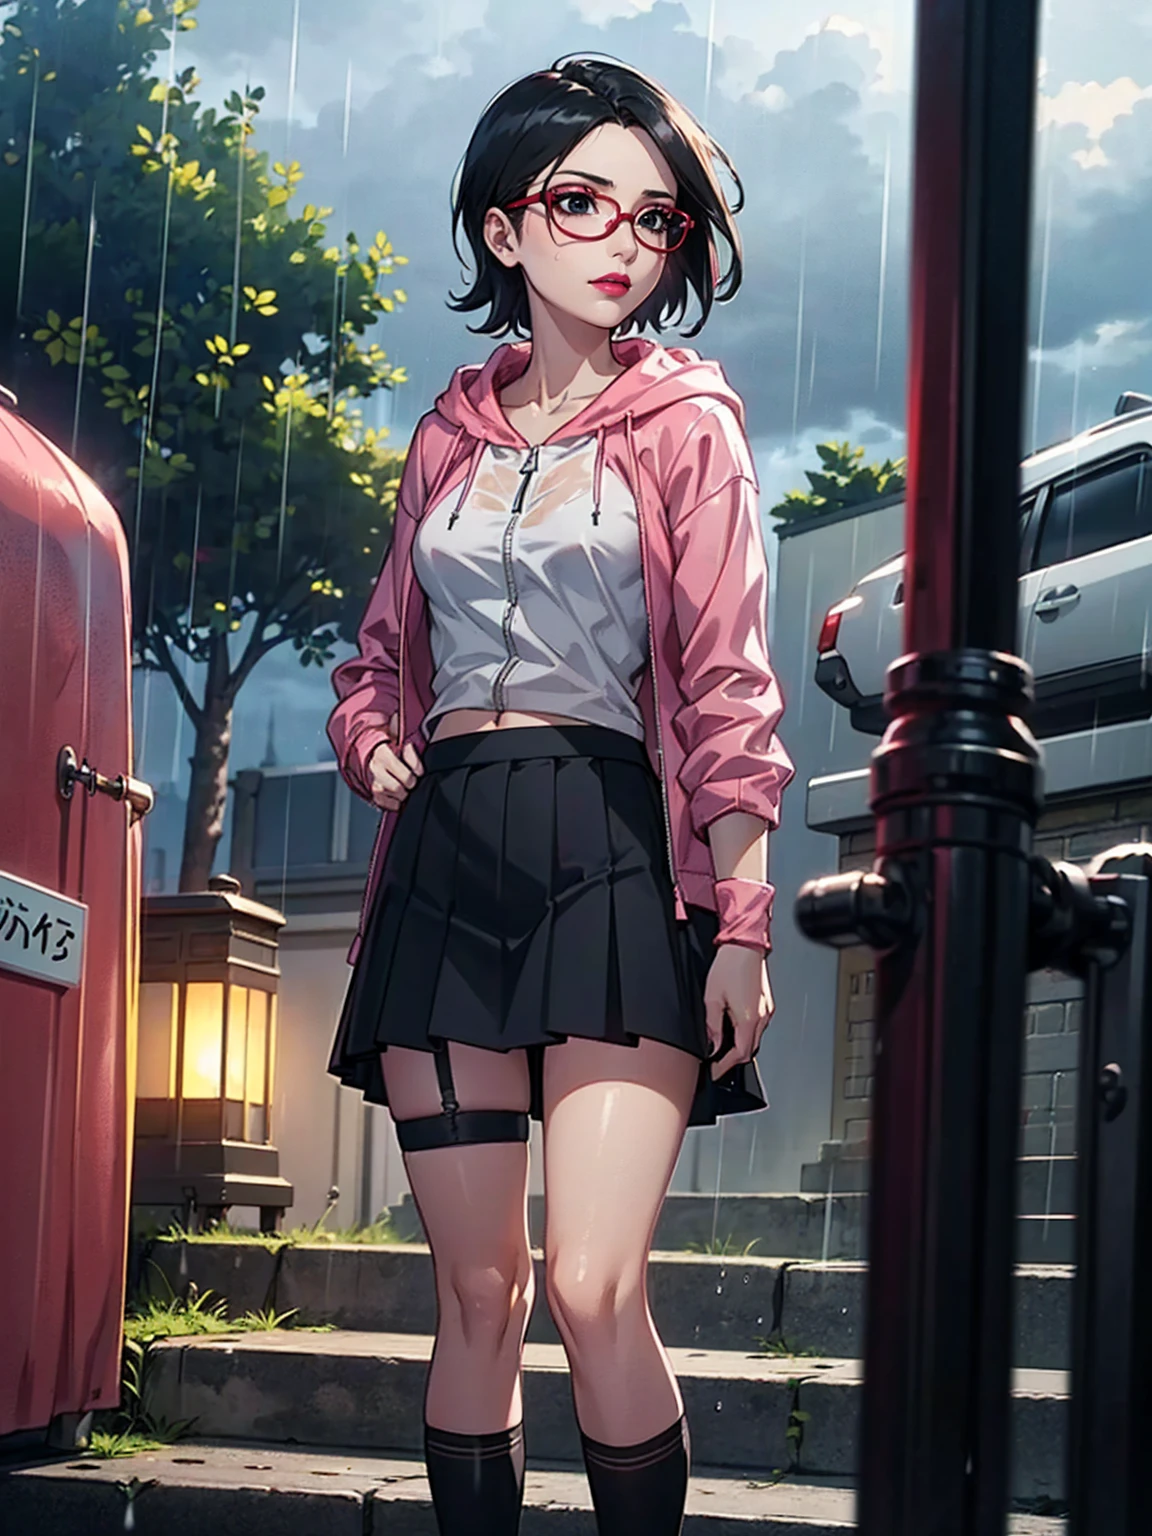 (1girl, solo, alone), (WakatsukiRisa, Sarada Uchiha, black hair, short hair, black eyes, red glasses), ((solo, (1woman, (small bust), pink lipstick, black eyes), Extremely detailed, ambient soft lighting, 4k, perfect eyes, a perfect face, perfect lighting, a 1girl)), ((fitness,, shapely body, athletic body, toned body)), ((on a cloudy street，bright street，Corner store，stair station，Torrential rain and rain，She is wearing a red hooded jacket，Put on a hoodie，White color blouse, white printed blouse，Short black skirt, full skirt, black pleated skirt, black garter belt，Martin shoes，Rain-soaked clothes，Black Exposure，outdoor deep tent)), draped collar